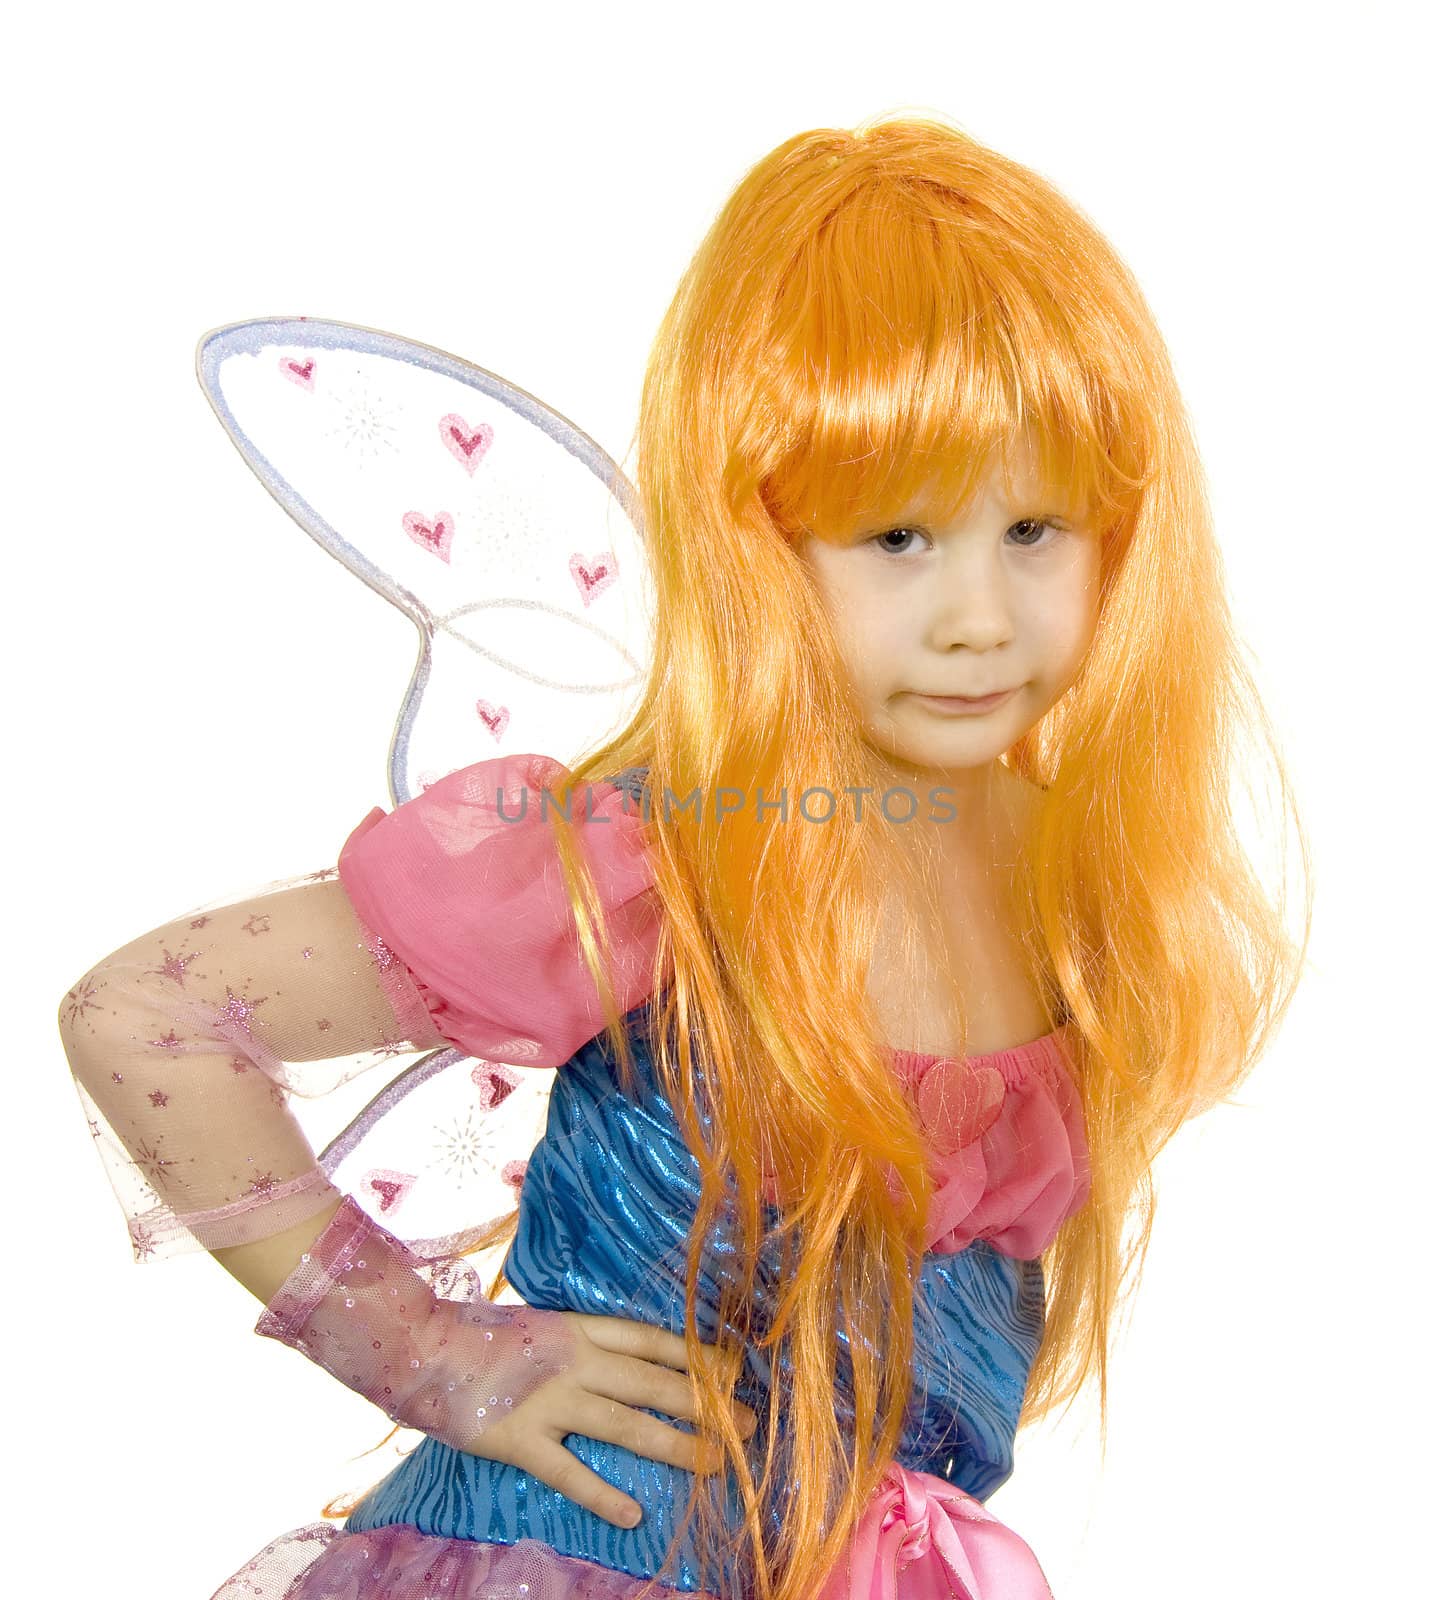 Girl in fancy dress and a wig on a white background